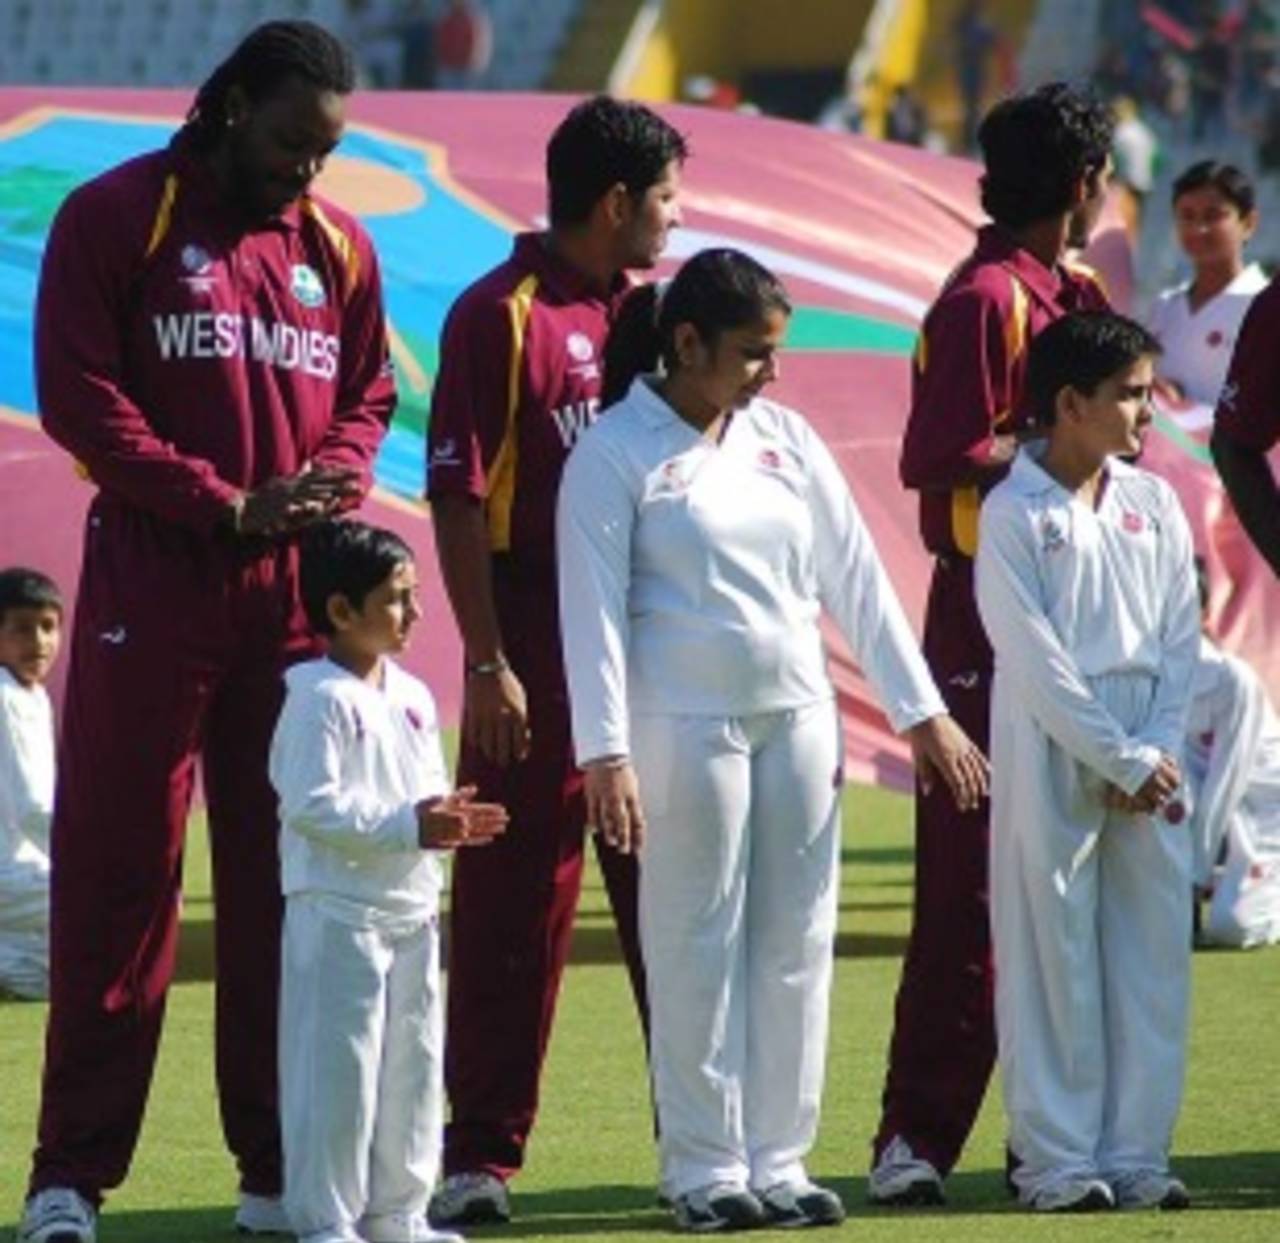 Chris Gayle comforts a nervous child, Ireland v West Indies, Group B, World Cup, Mohali, March 11, 2011